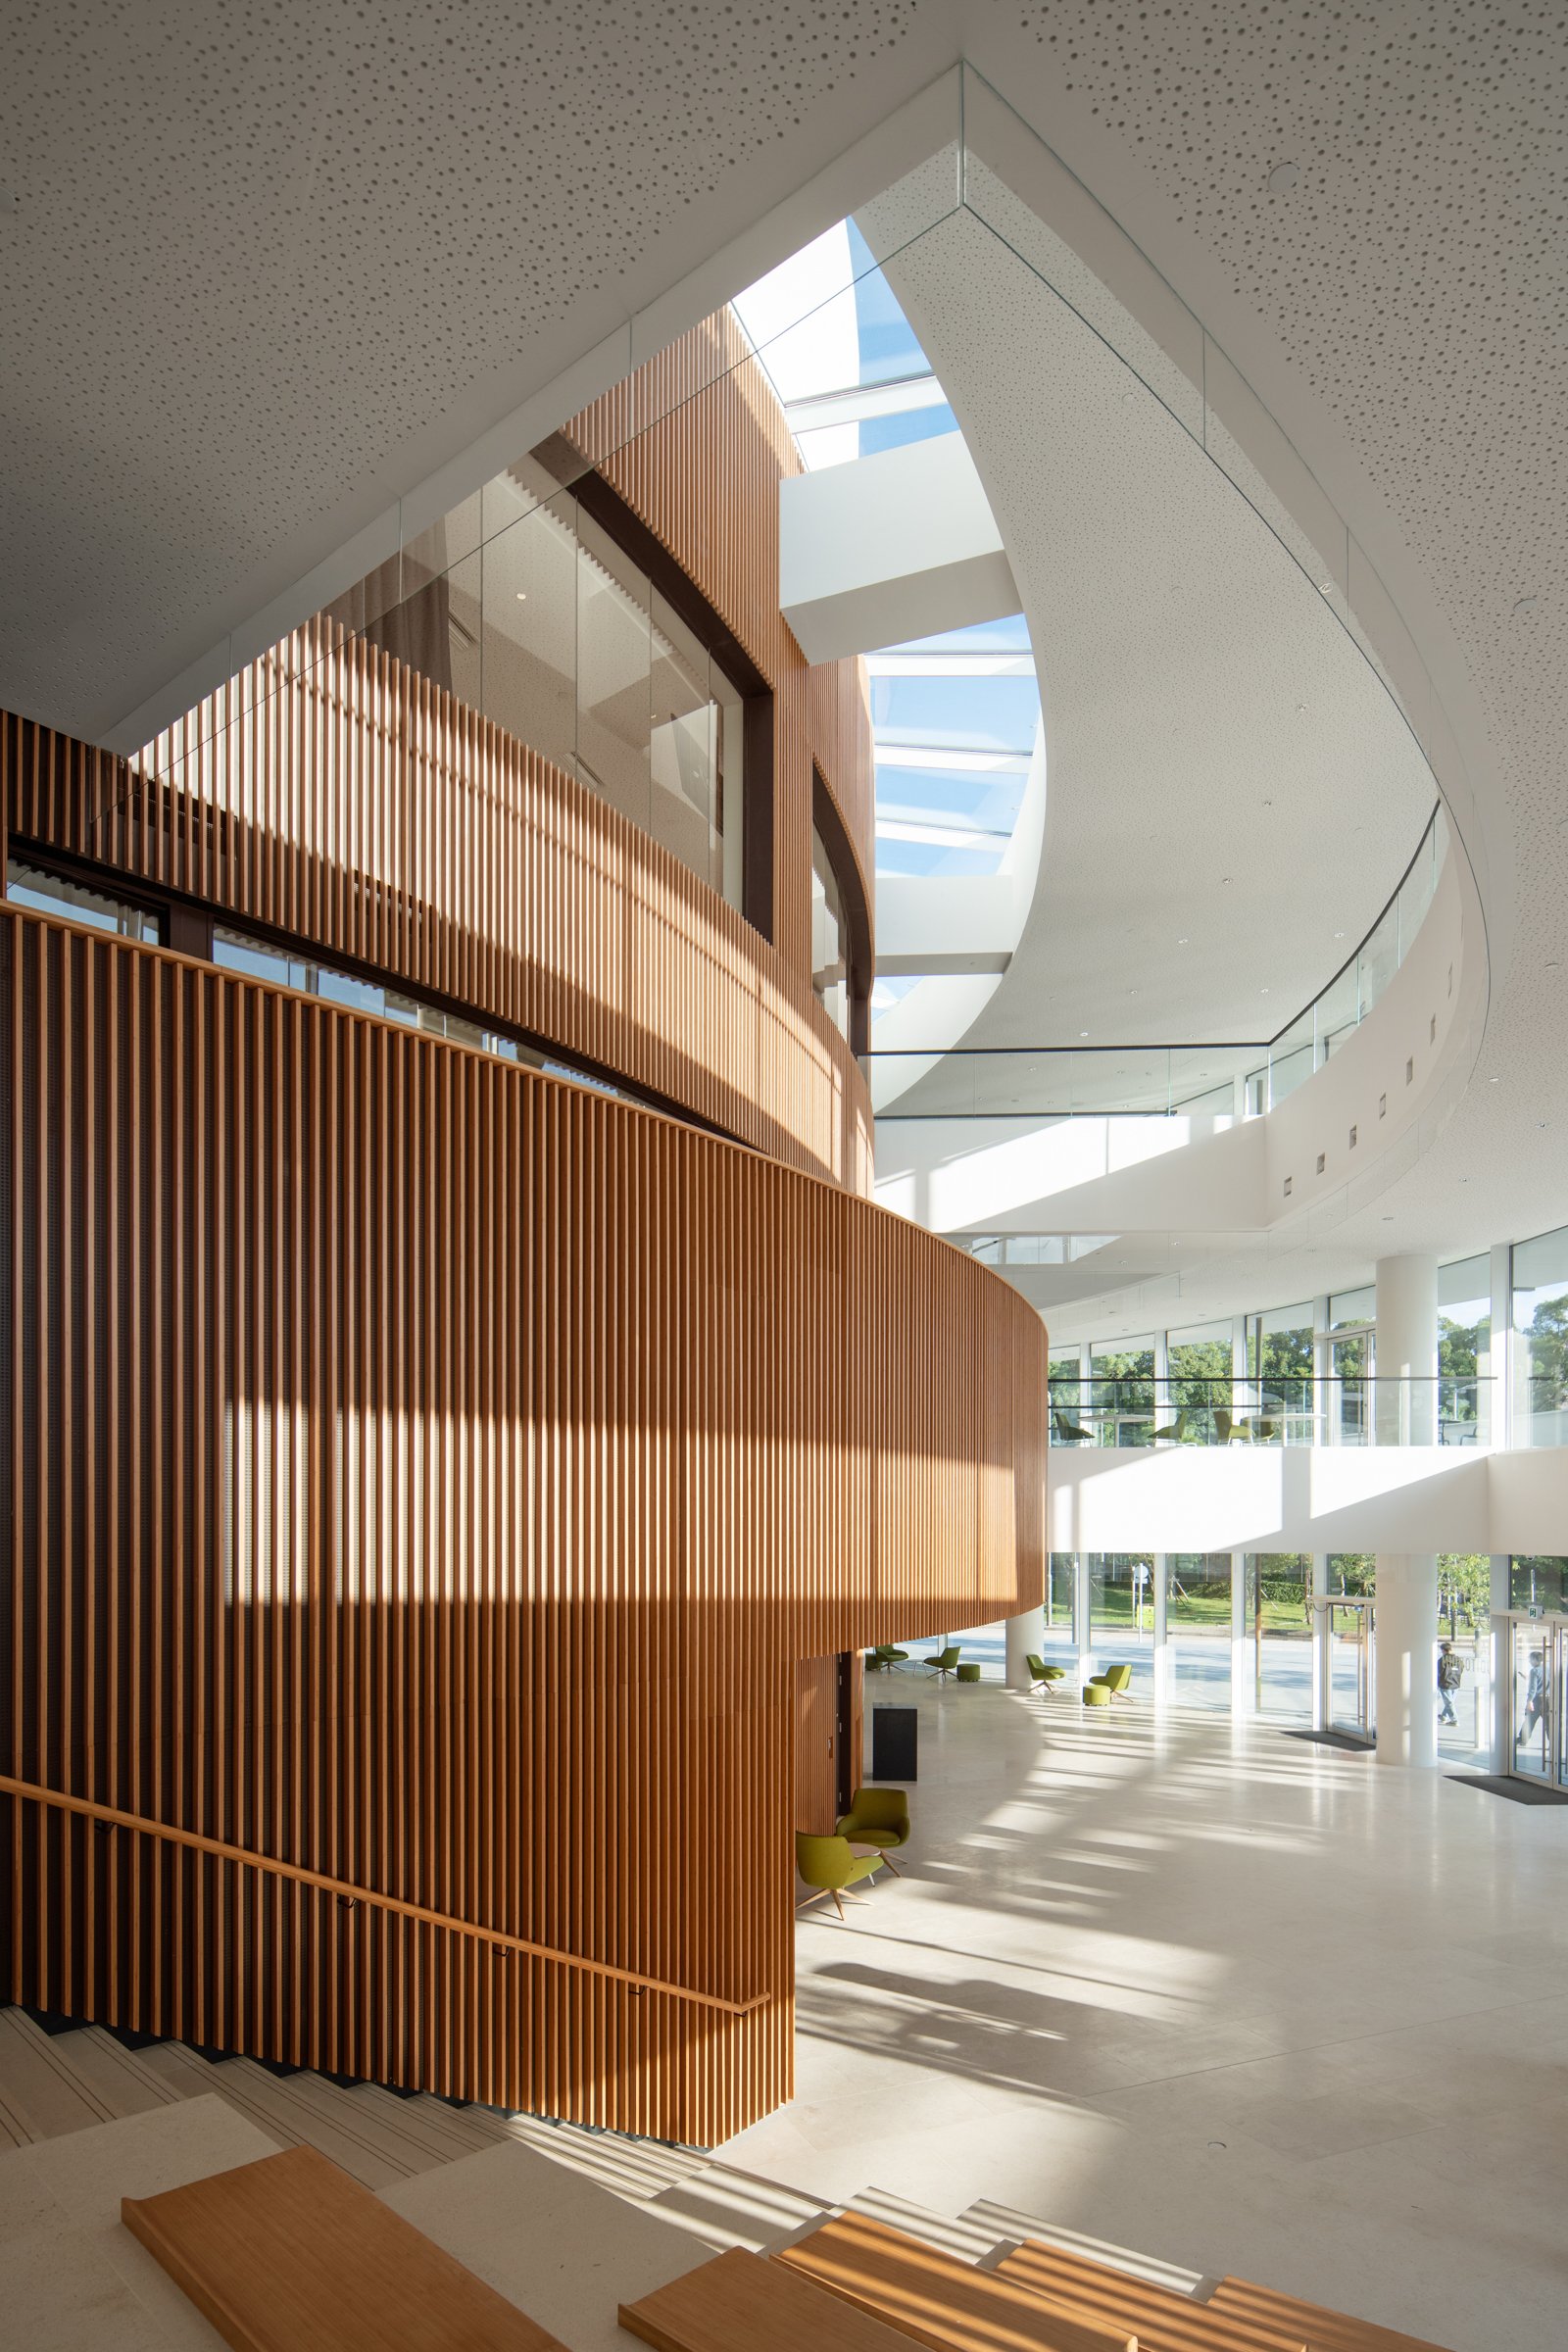  Shaw Auditorium at Hong Kong University of Science and Technology Designed by Henning Larsen Architects  Photographed for Henning Larsen Architects 